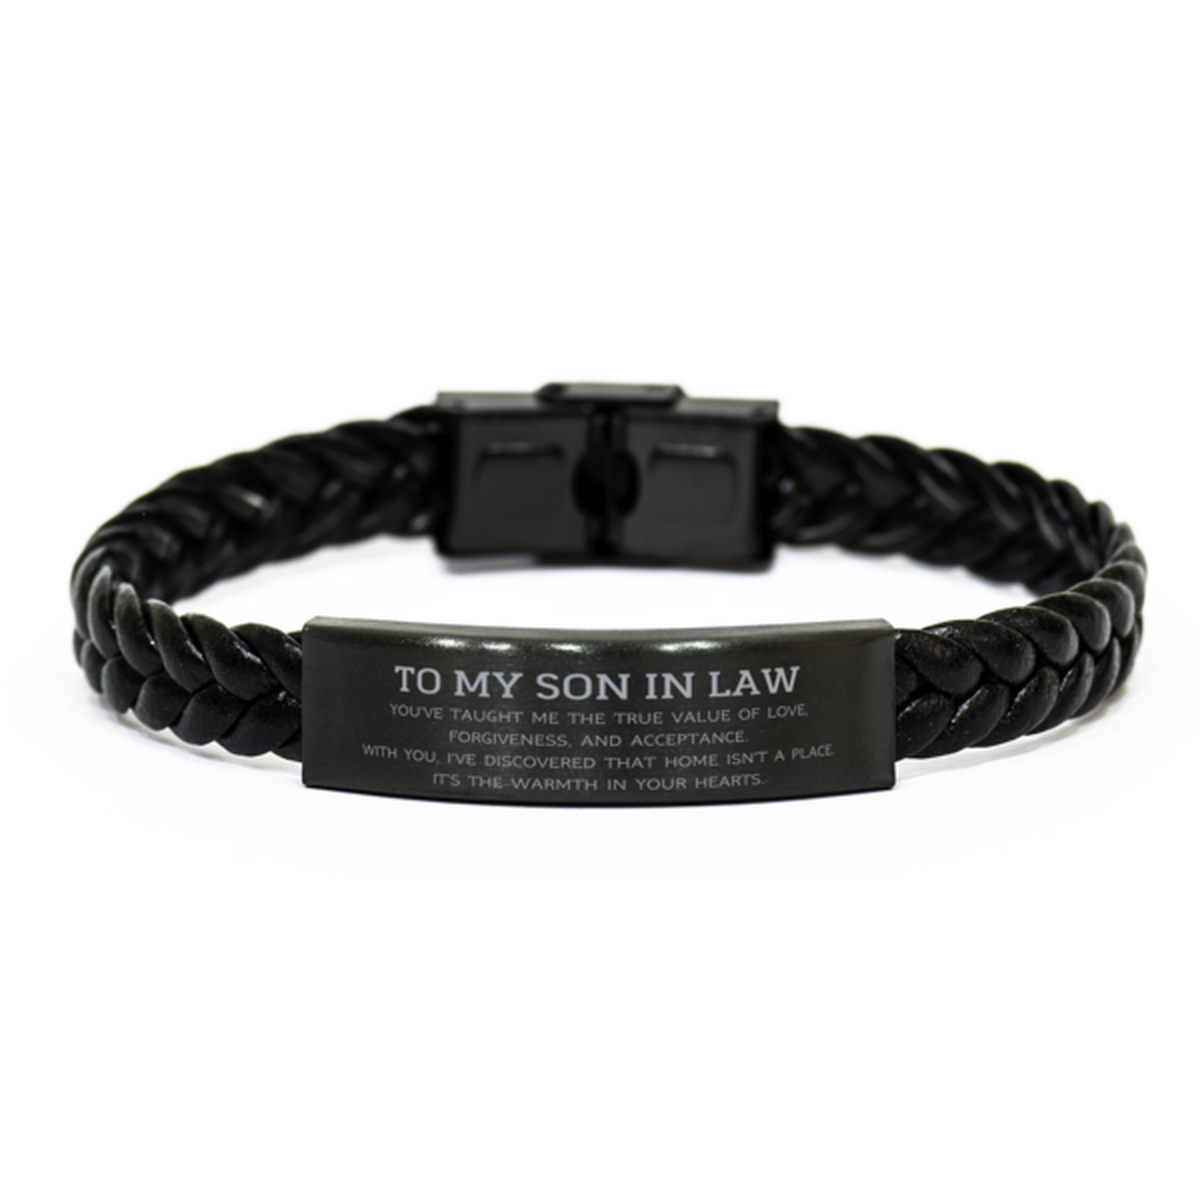 To My Son In Law Gifts, You've taught me the true value of love, Thank You Gifts For Son In Law, Birthday Braided Leather Bracelet For Son In Law